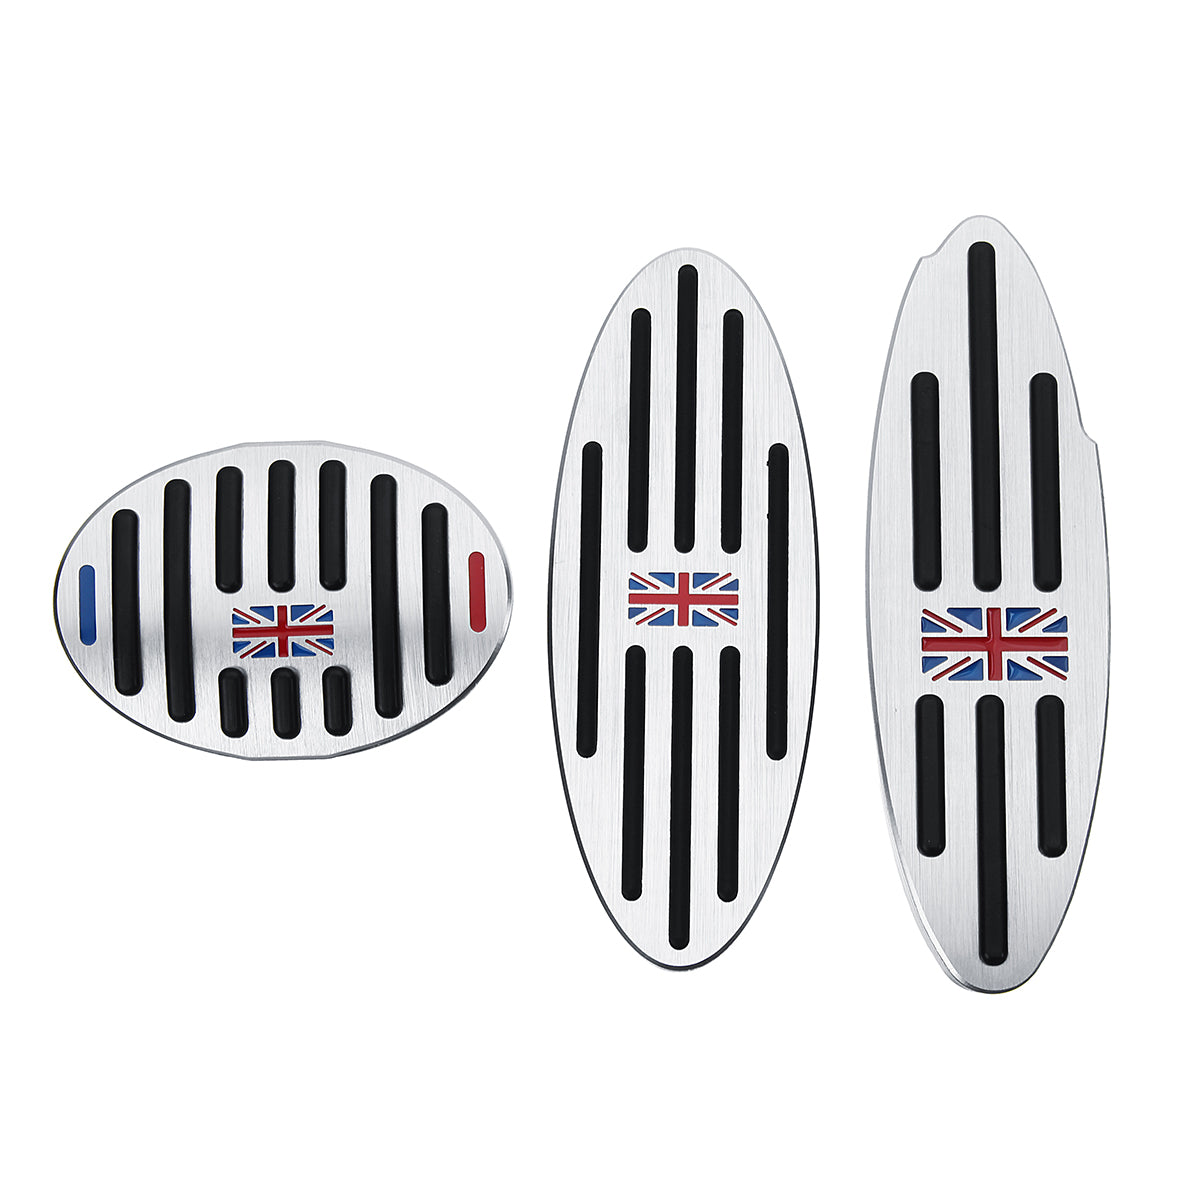 White Smoke Footrest Gas Brake Clutch Car Pedal Pad Covers For BMW Mini Cooper JCW S